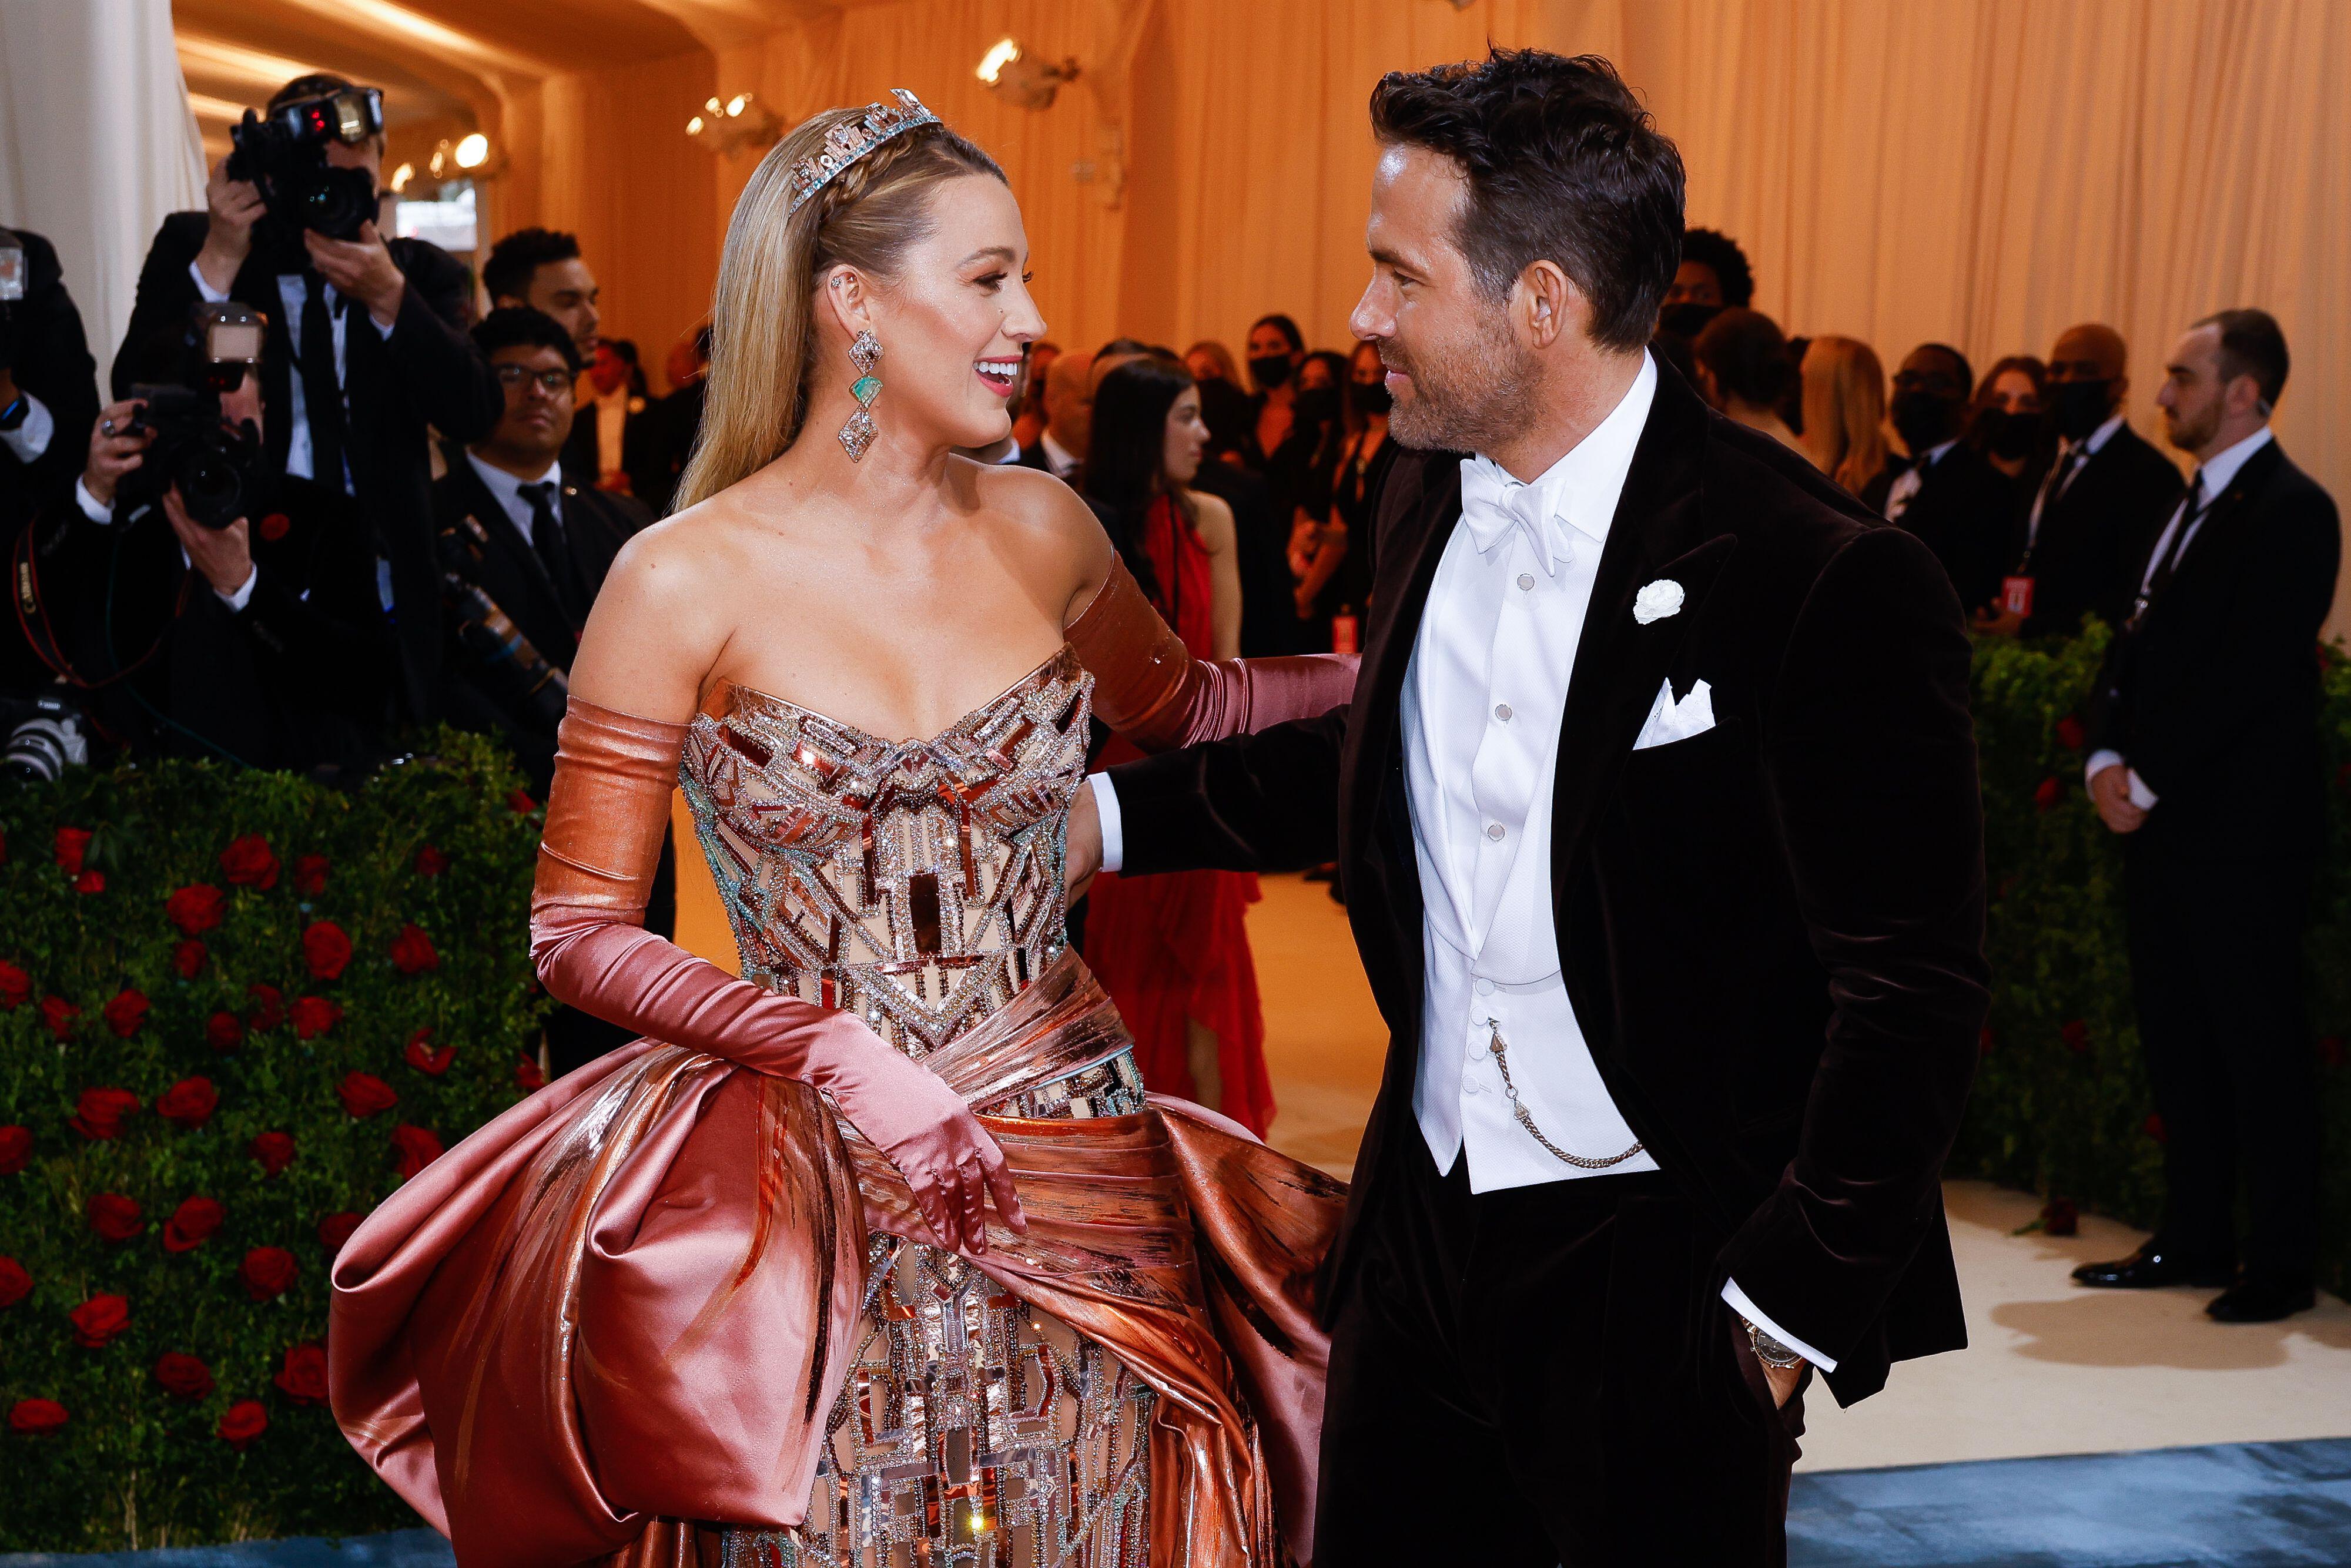 Blake Lively channeled the Statue of Liberty at the Met Gala in a gown that  unraveled to create 2 stunning looks, going from copper to green